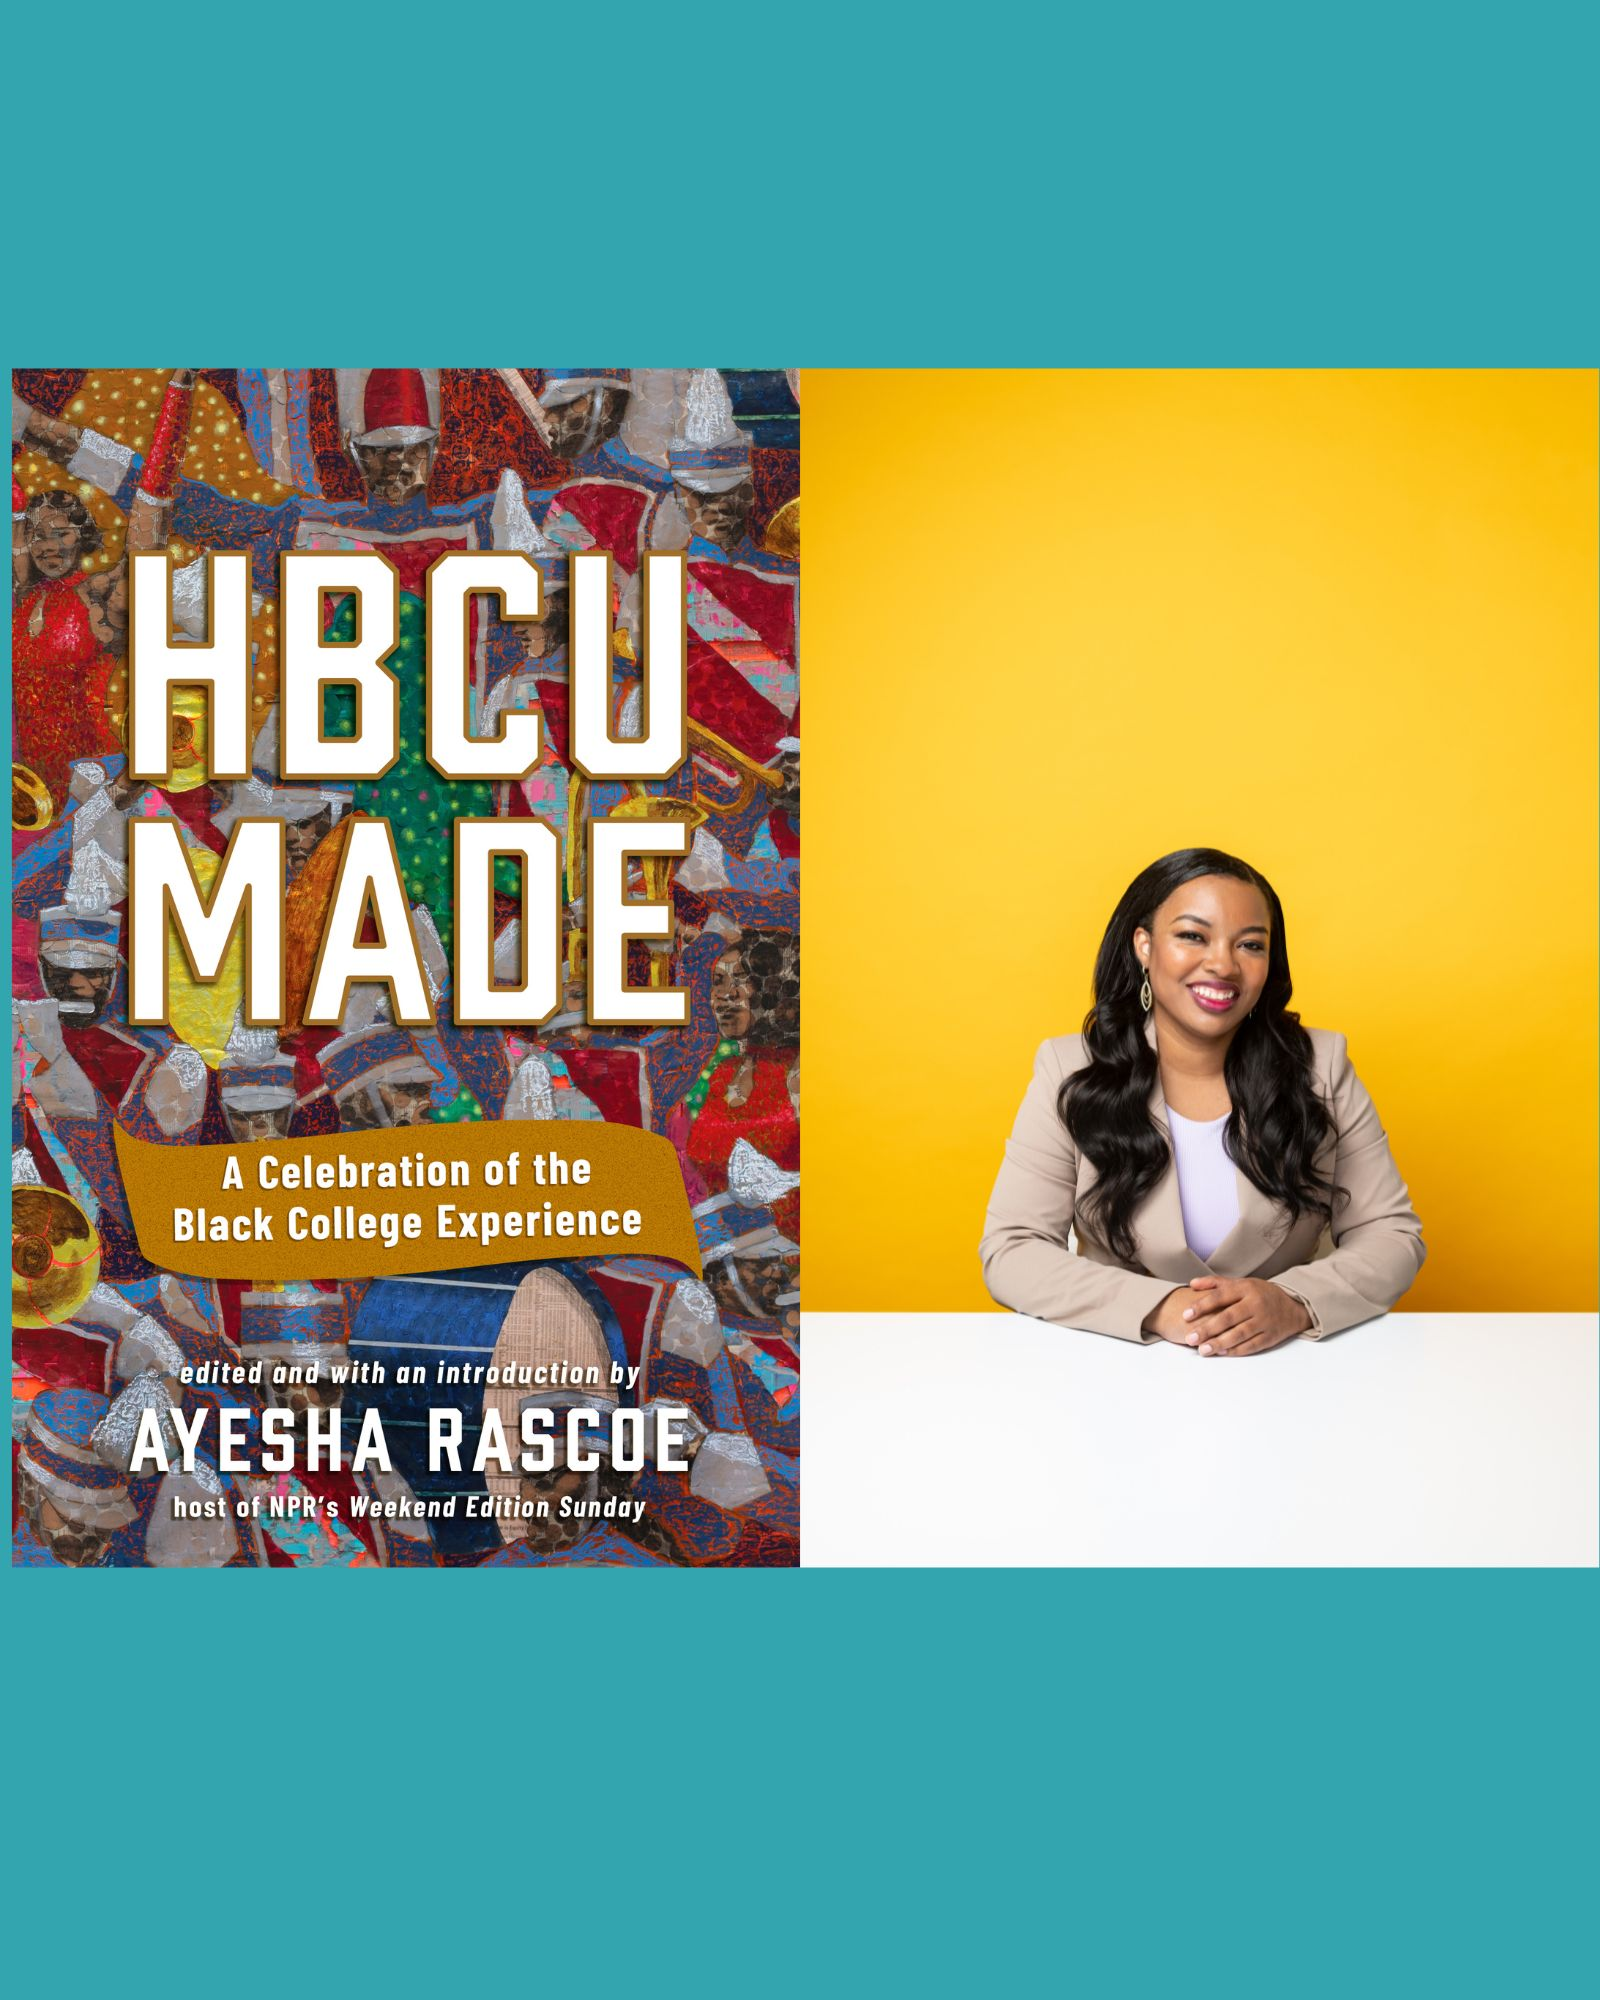 "HBCU Made" by NPR's Ayesha Rascoe highlights Black colleges